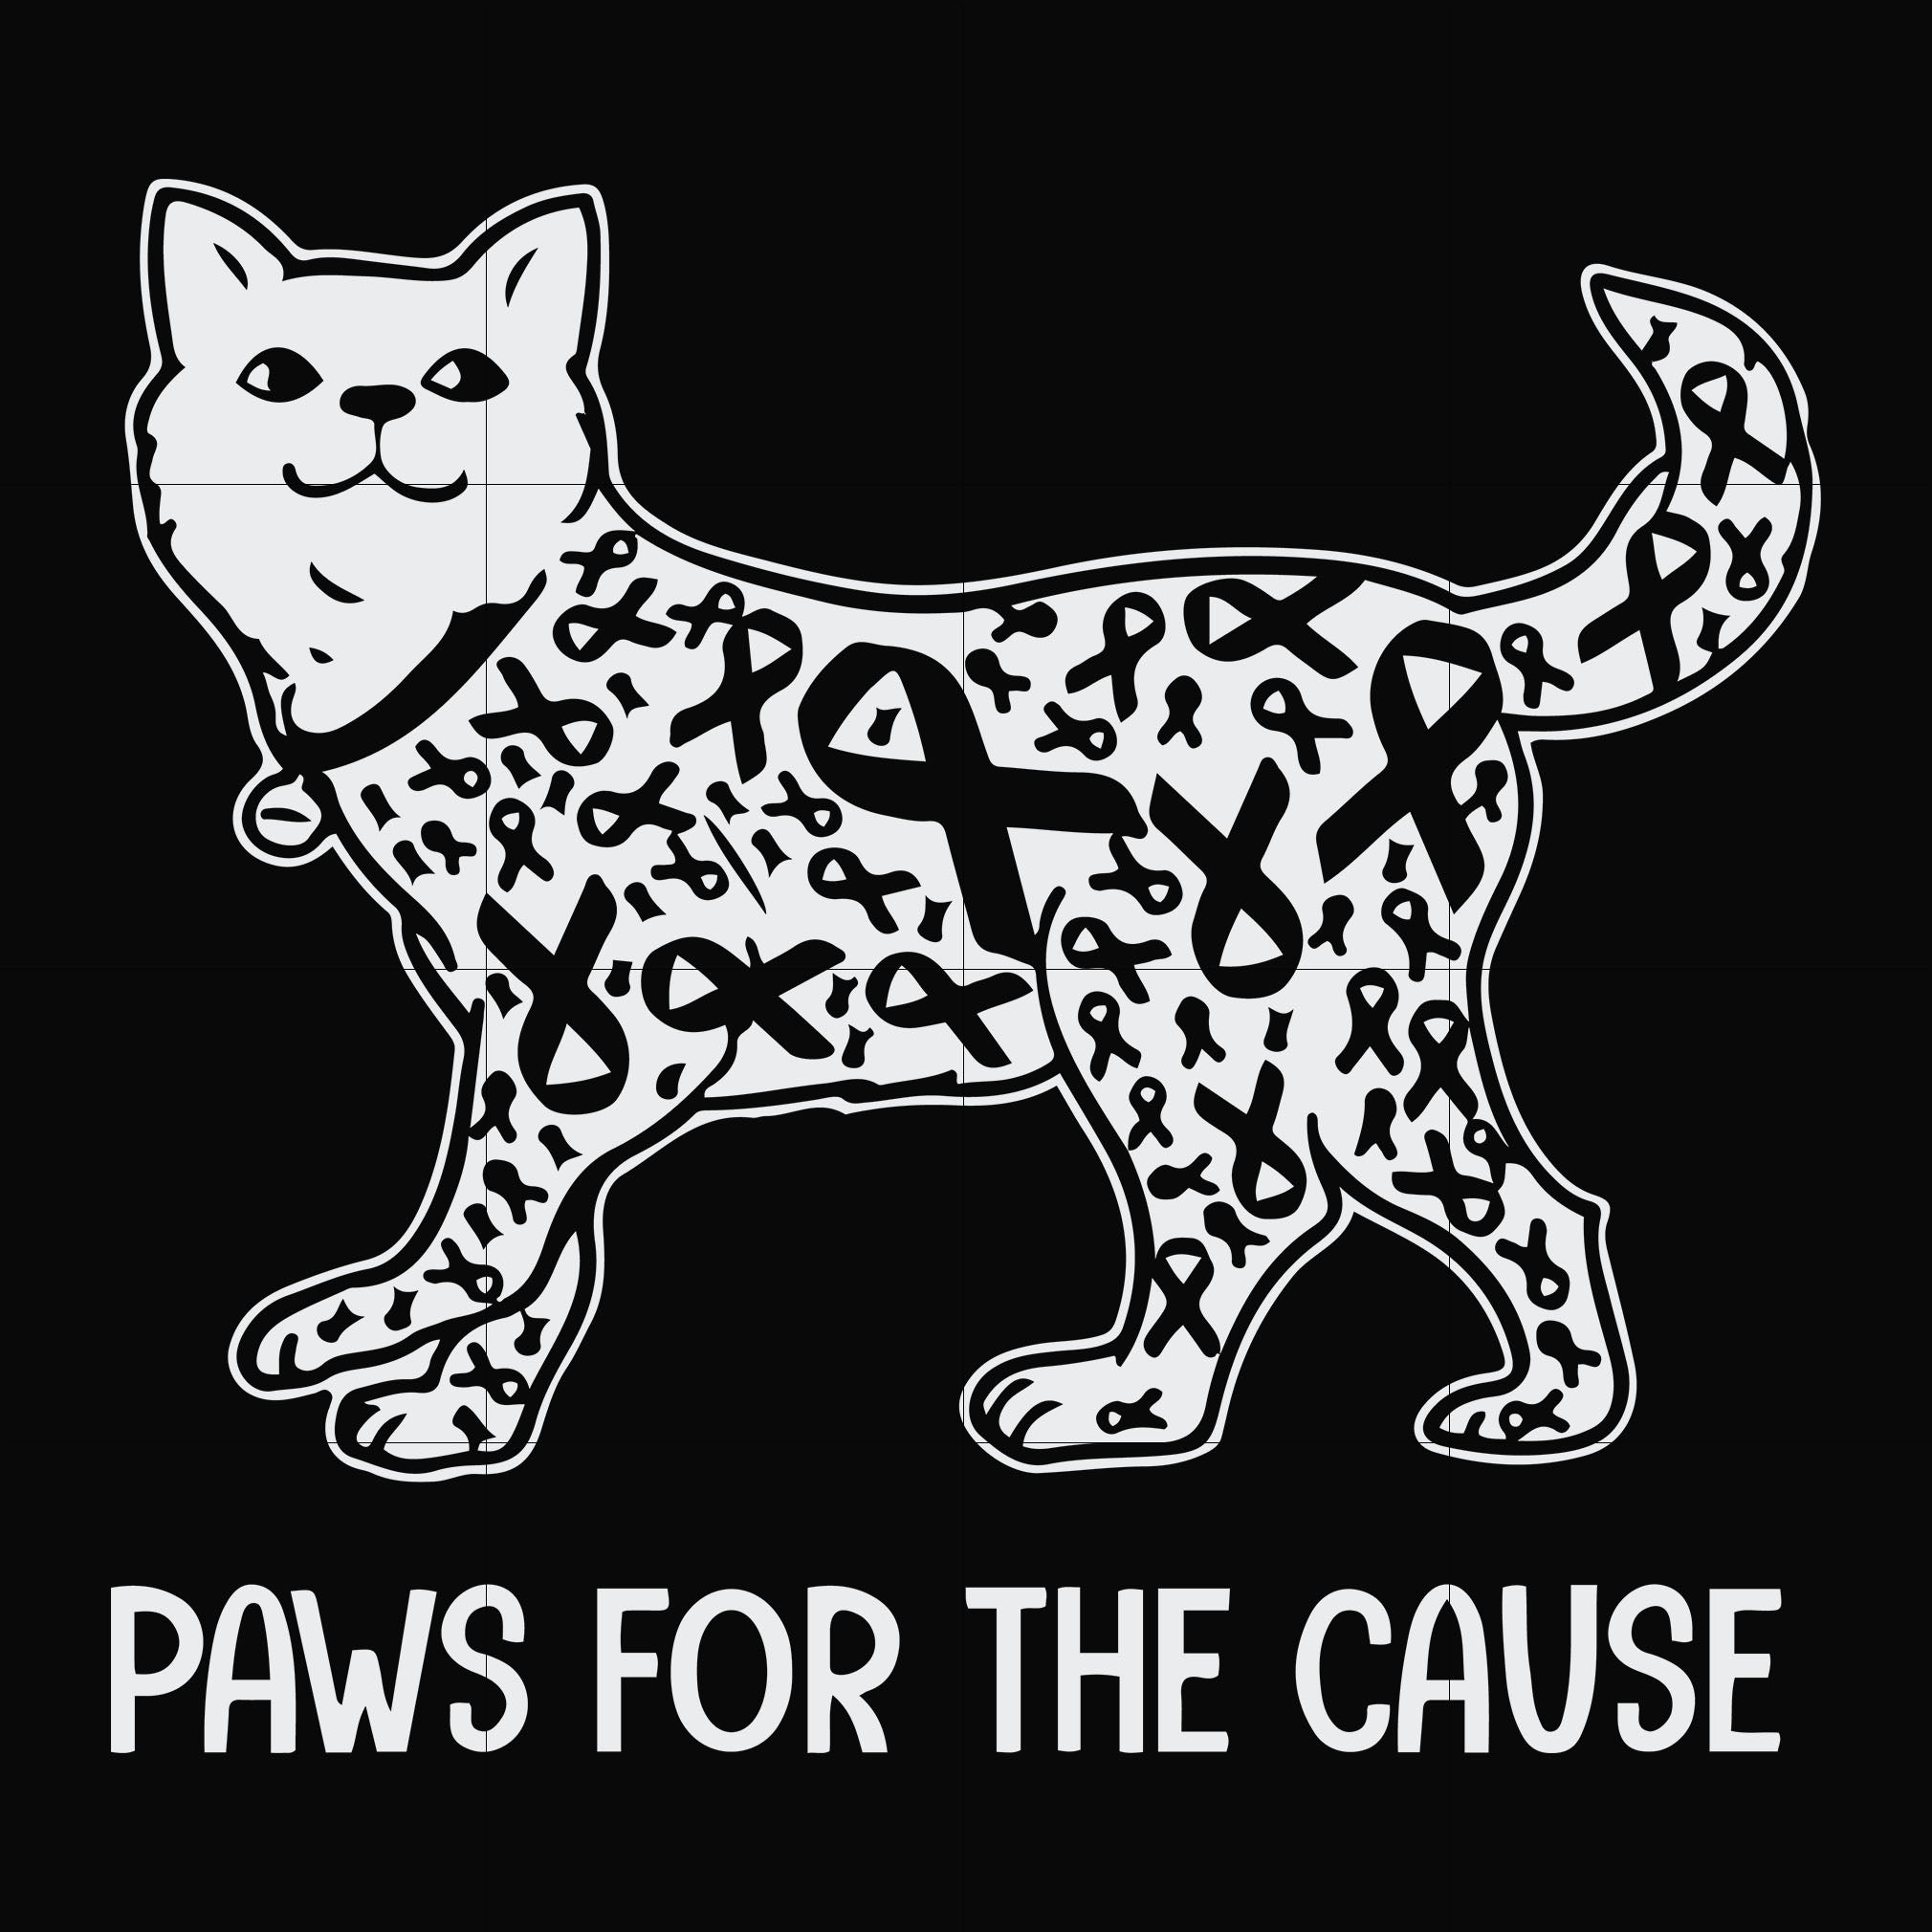 Paws for the cause svg, png, dxf, eps file FN000963